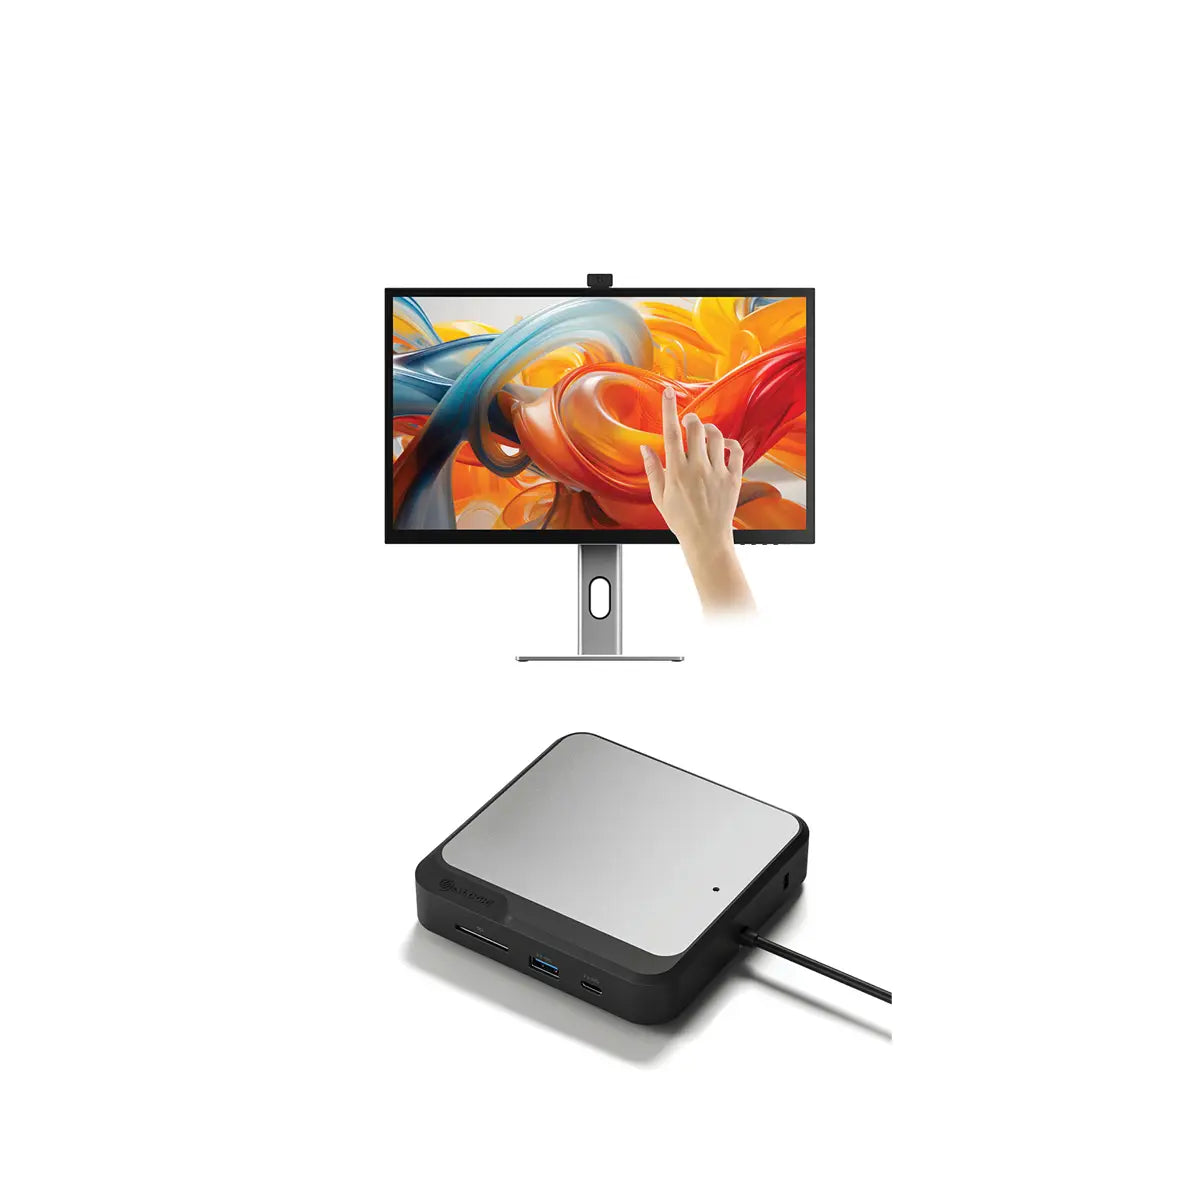 clarity-pro-touch-27-uhd-4k-monitor-with-65w-pd-webcam-and-touchscreen-dual-4k-universal-docking-station-displayport-edition_1